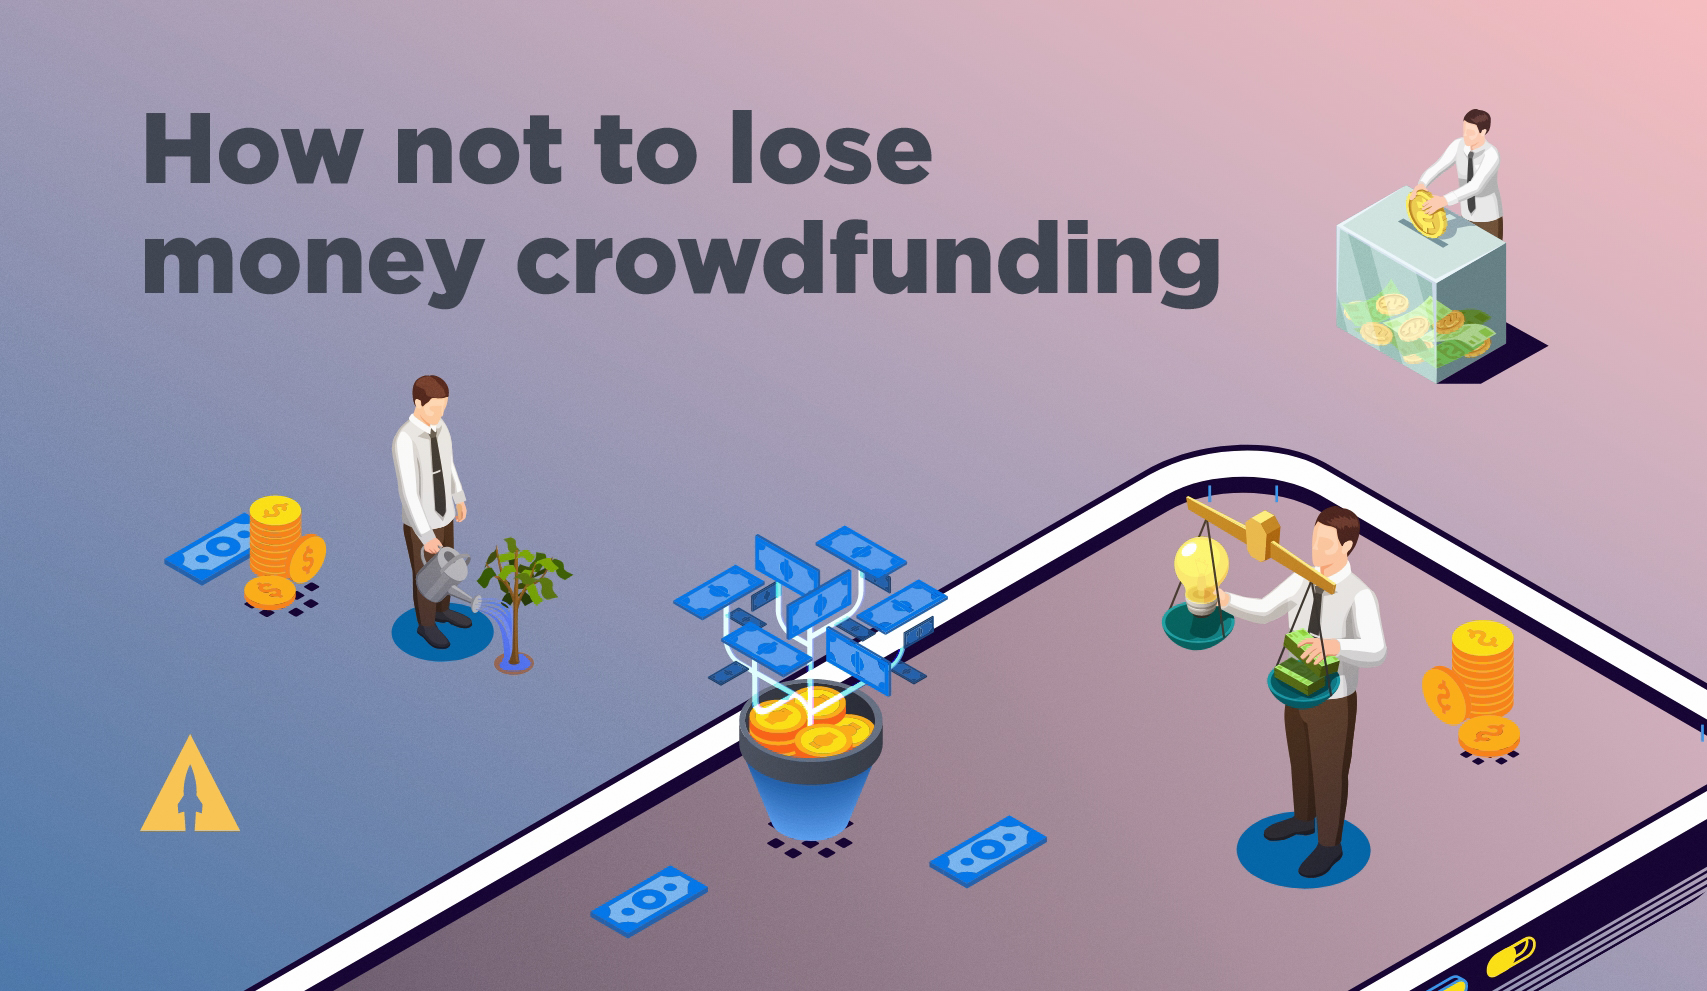 How not to lose money crowdfunding